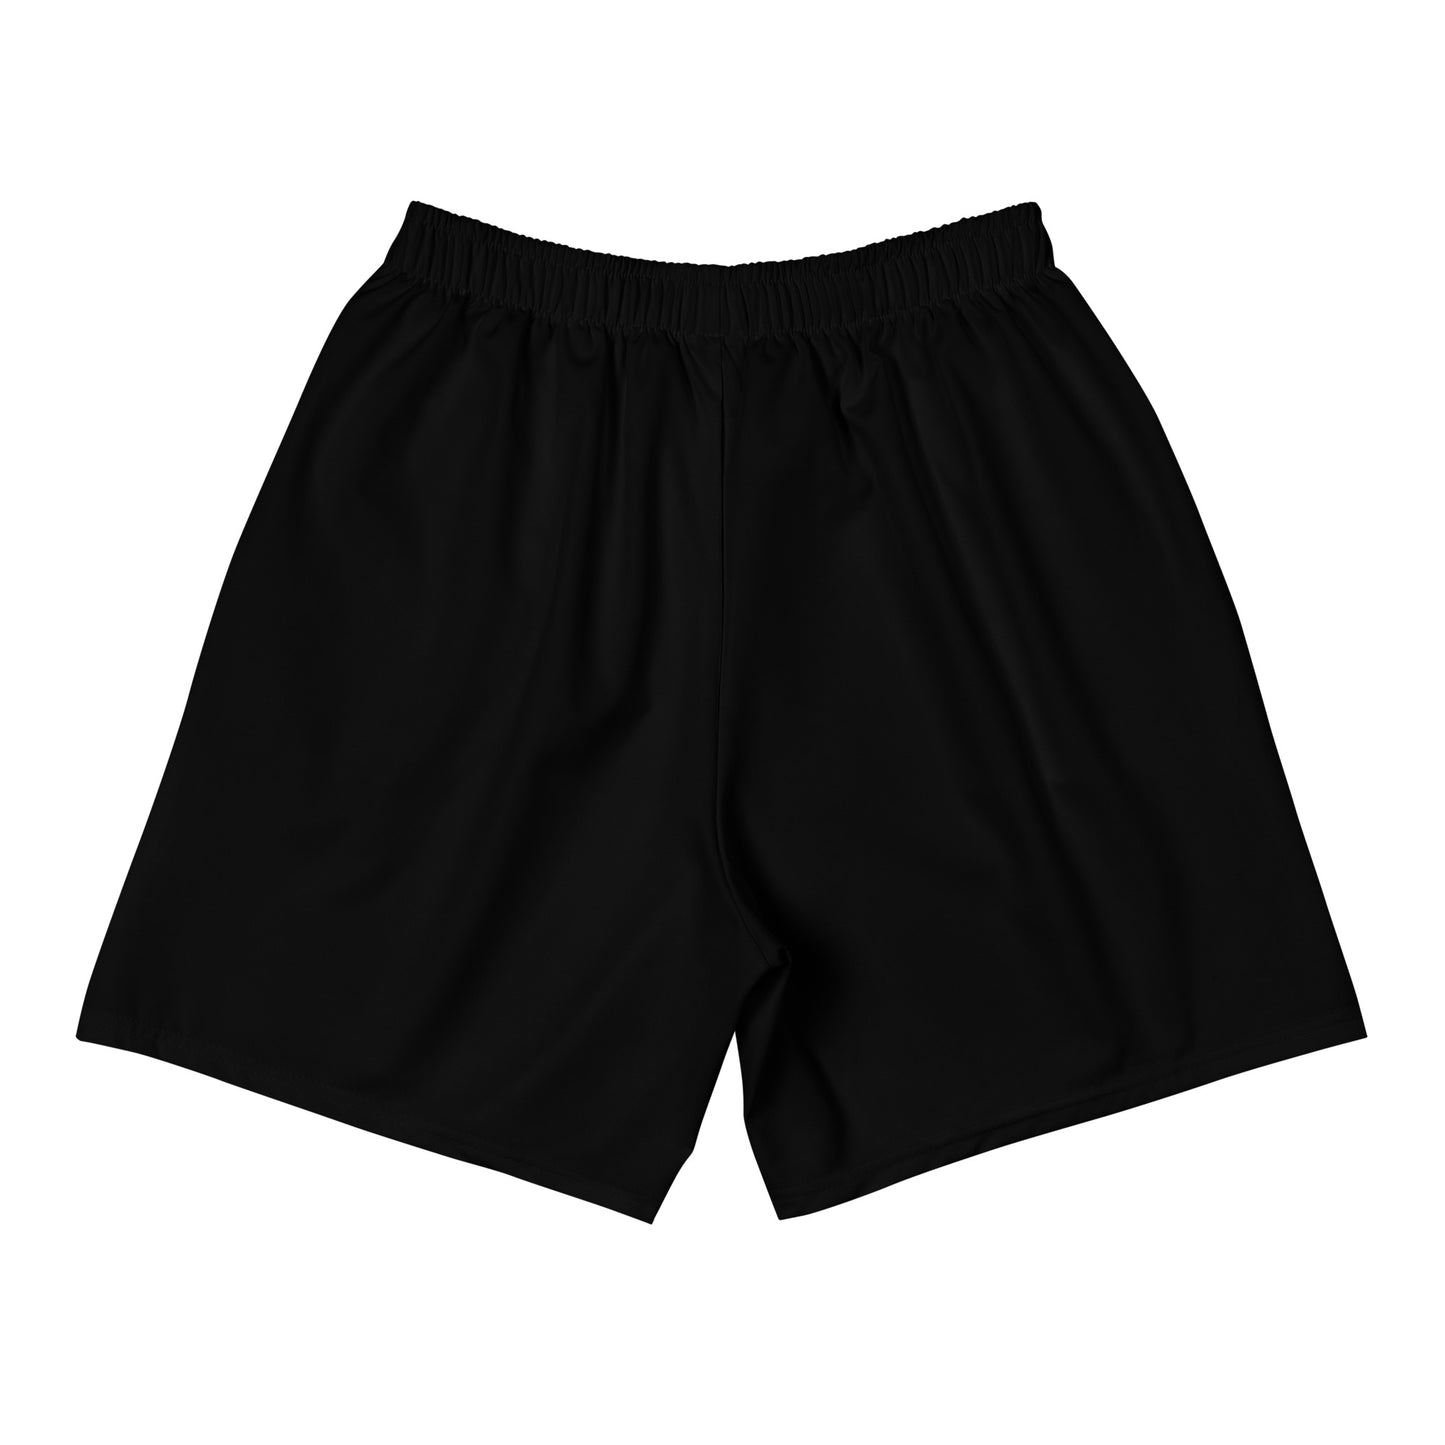 Men's Doggy Pickle Athletic Shorts